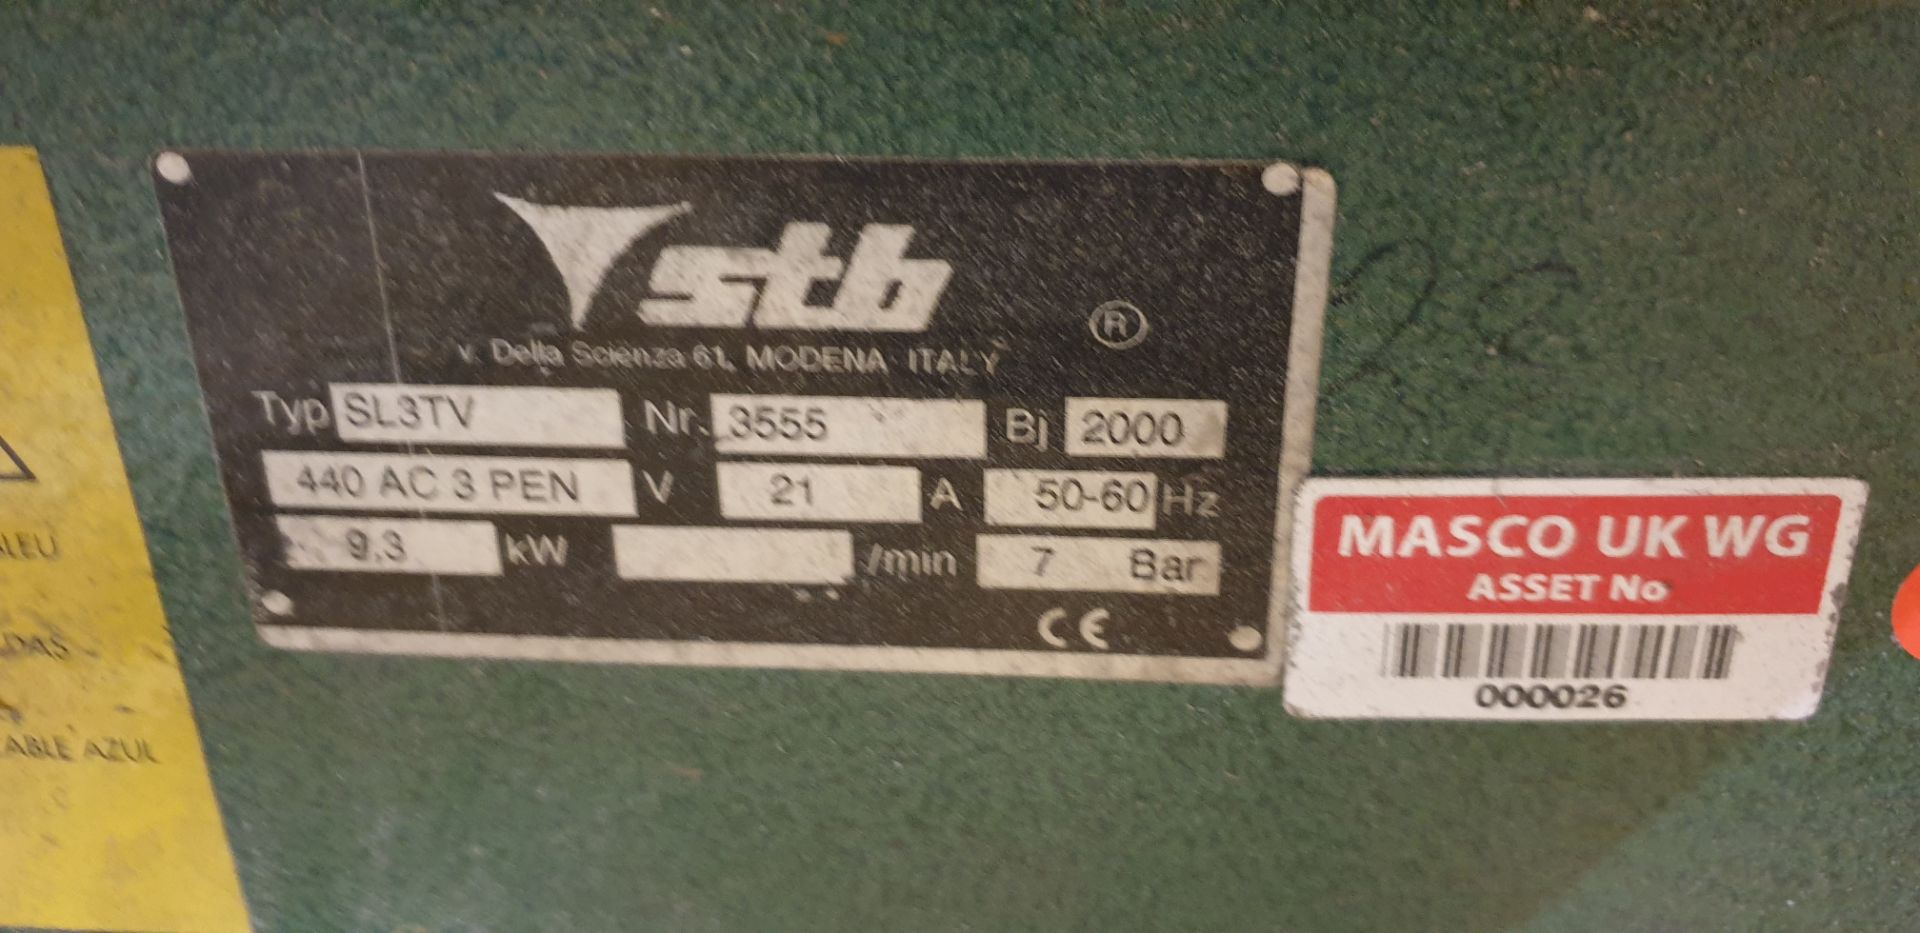 STB, SL3TV, 3-Head Welder , Serial Number: 3555, Year of Manufacture: 2000 - Image 4 of 5